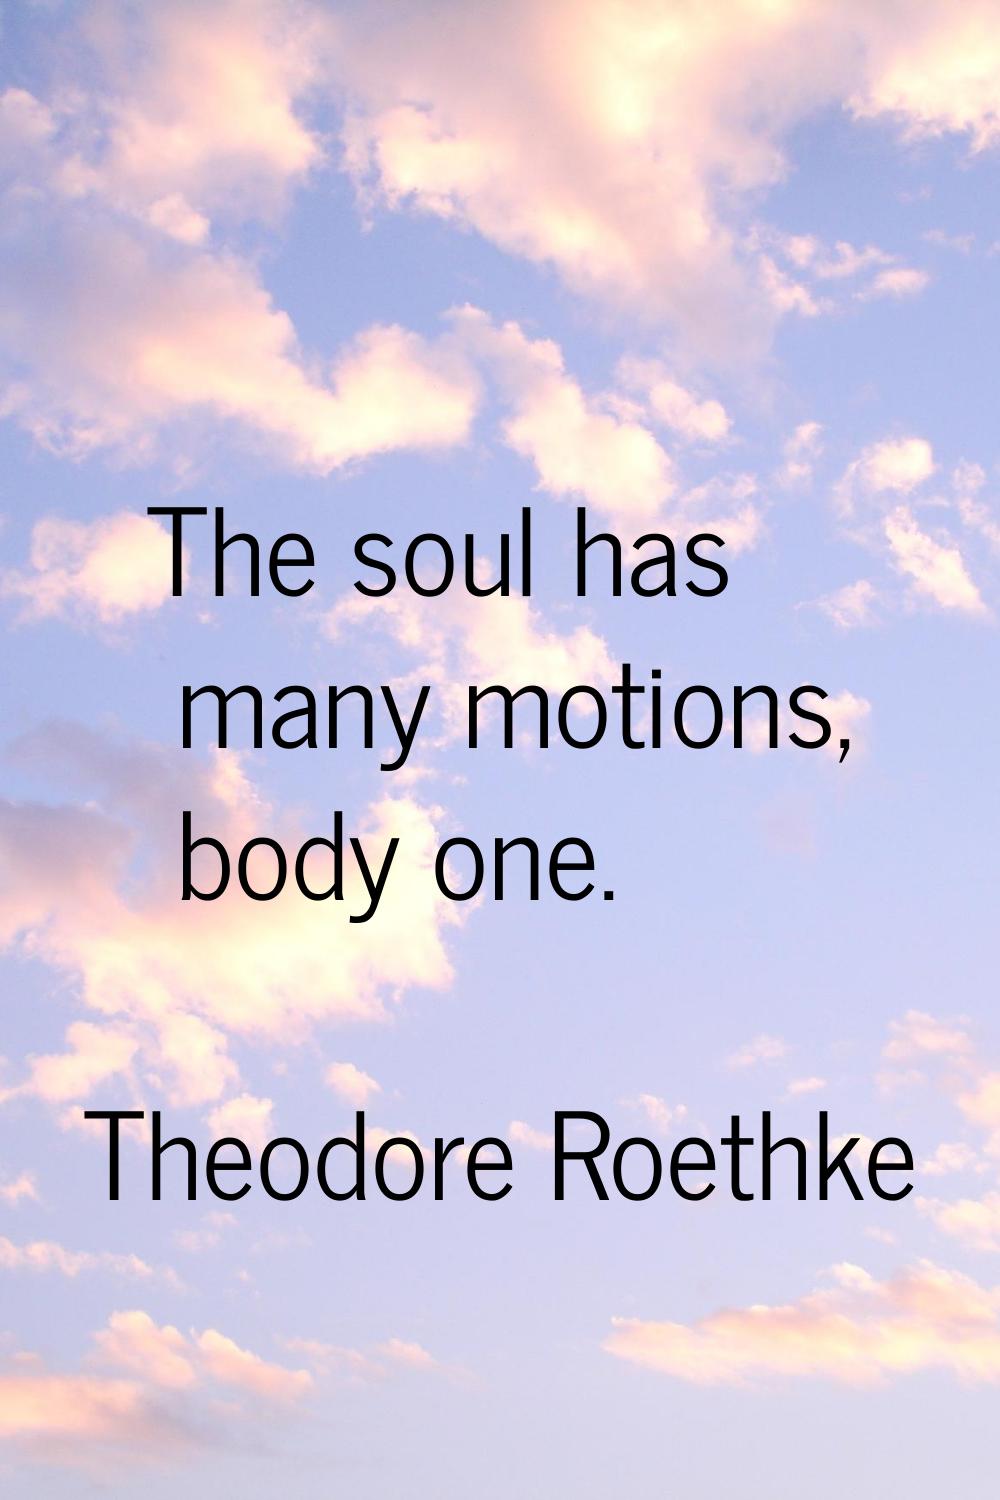 The soul has many motions, body one.